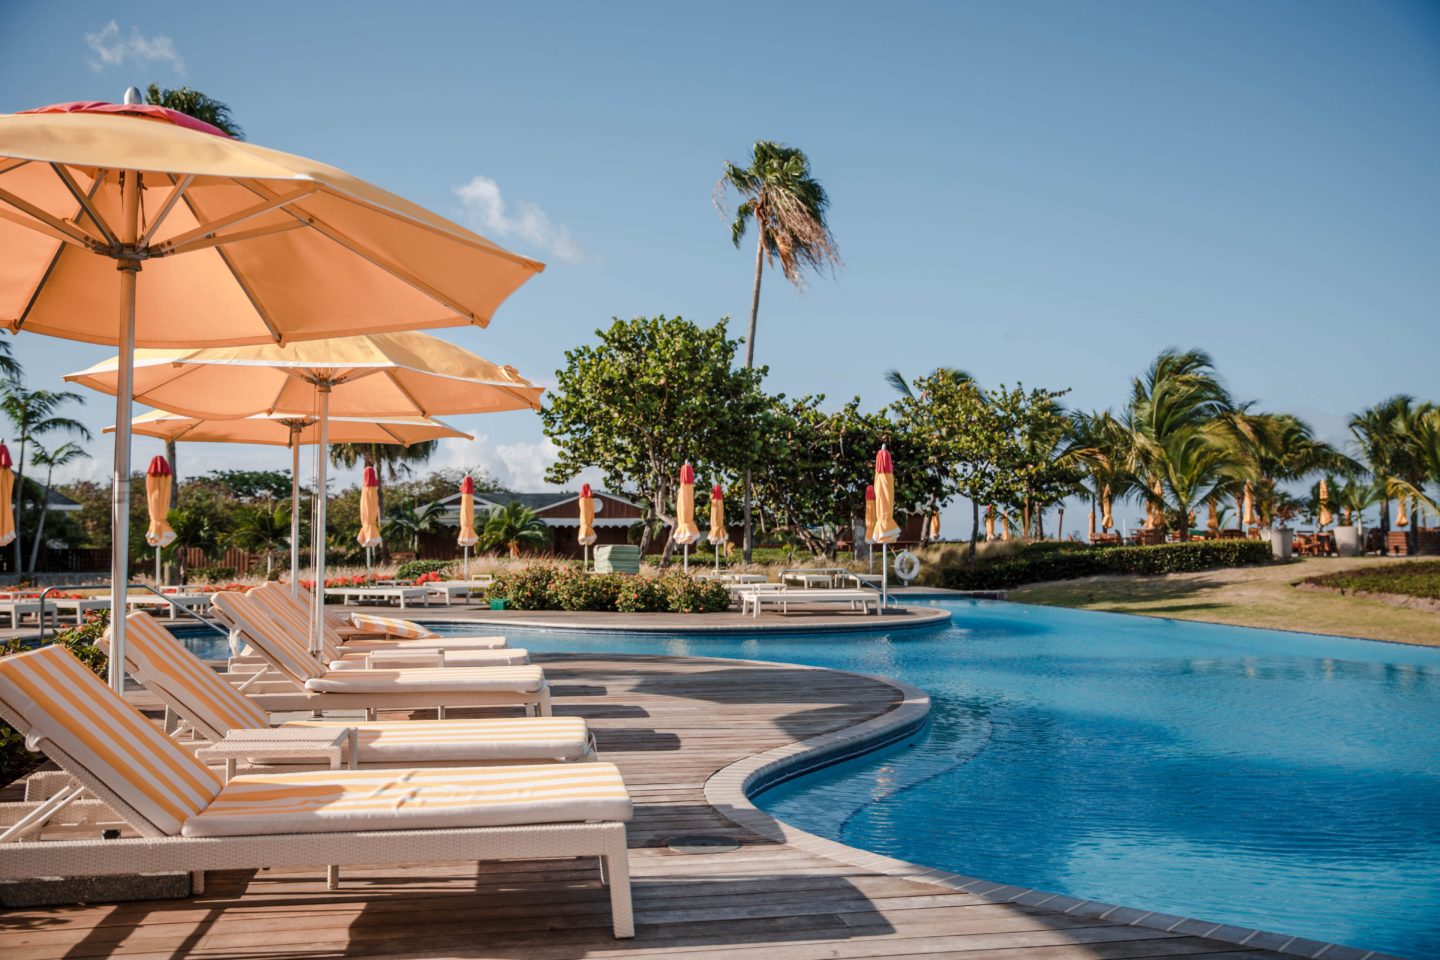 Where to Stay in the Caribbean Four Seasons Nevis in St. Kitts and Nevis | Luxury Caribbean Resort - Dana Berez